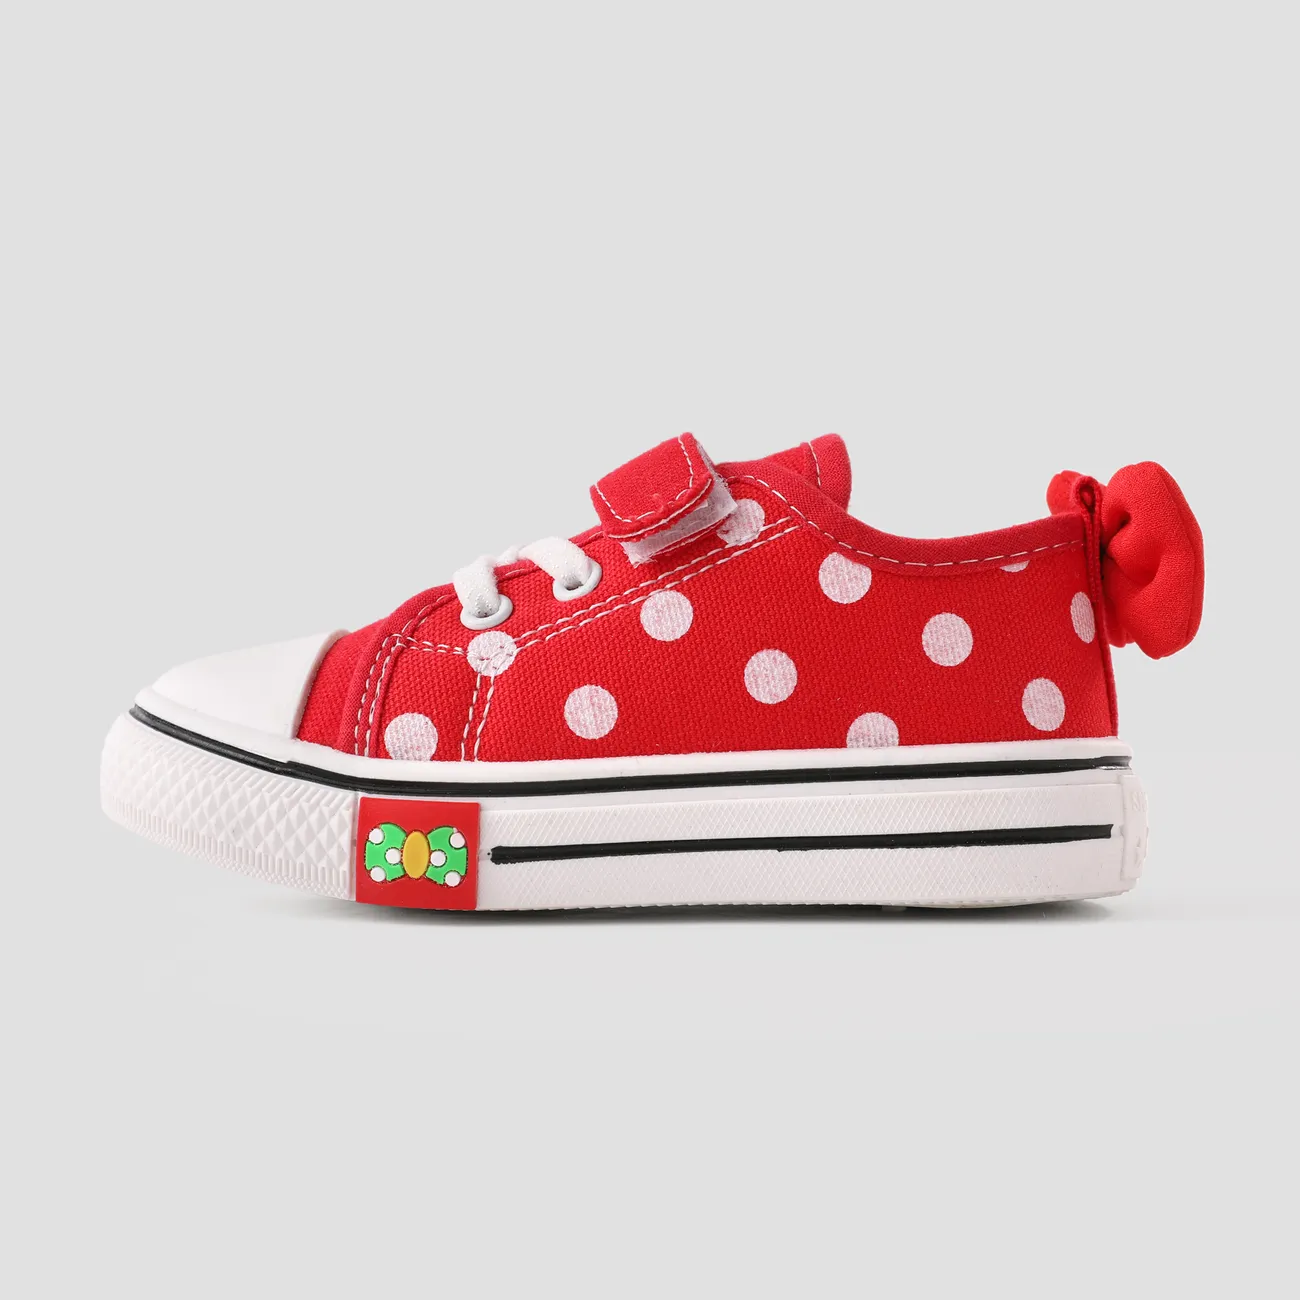 Toddler Girls' Polka Dot Design Bow Decor Velcro Casual Shoes Red big image 1